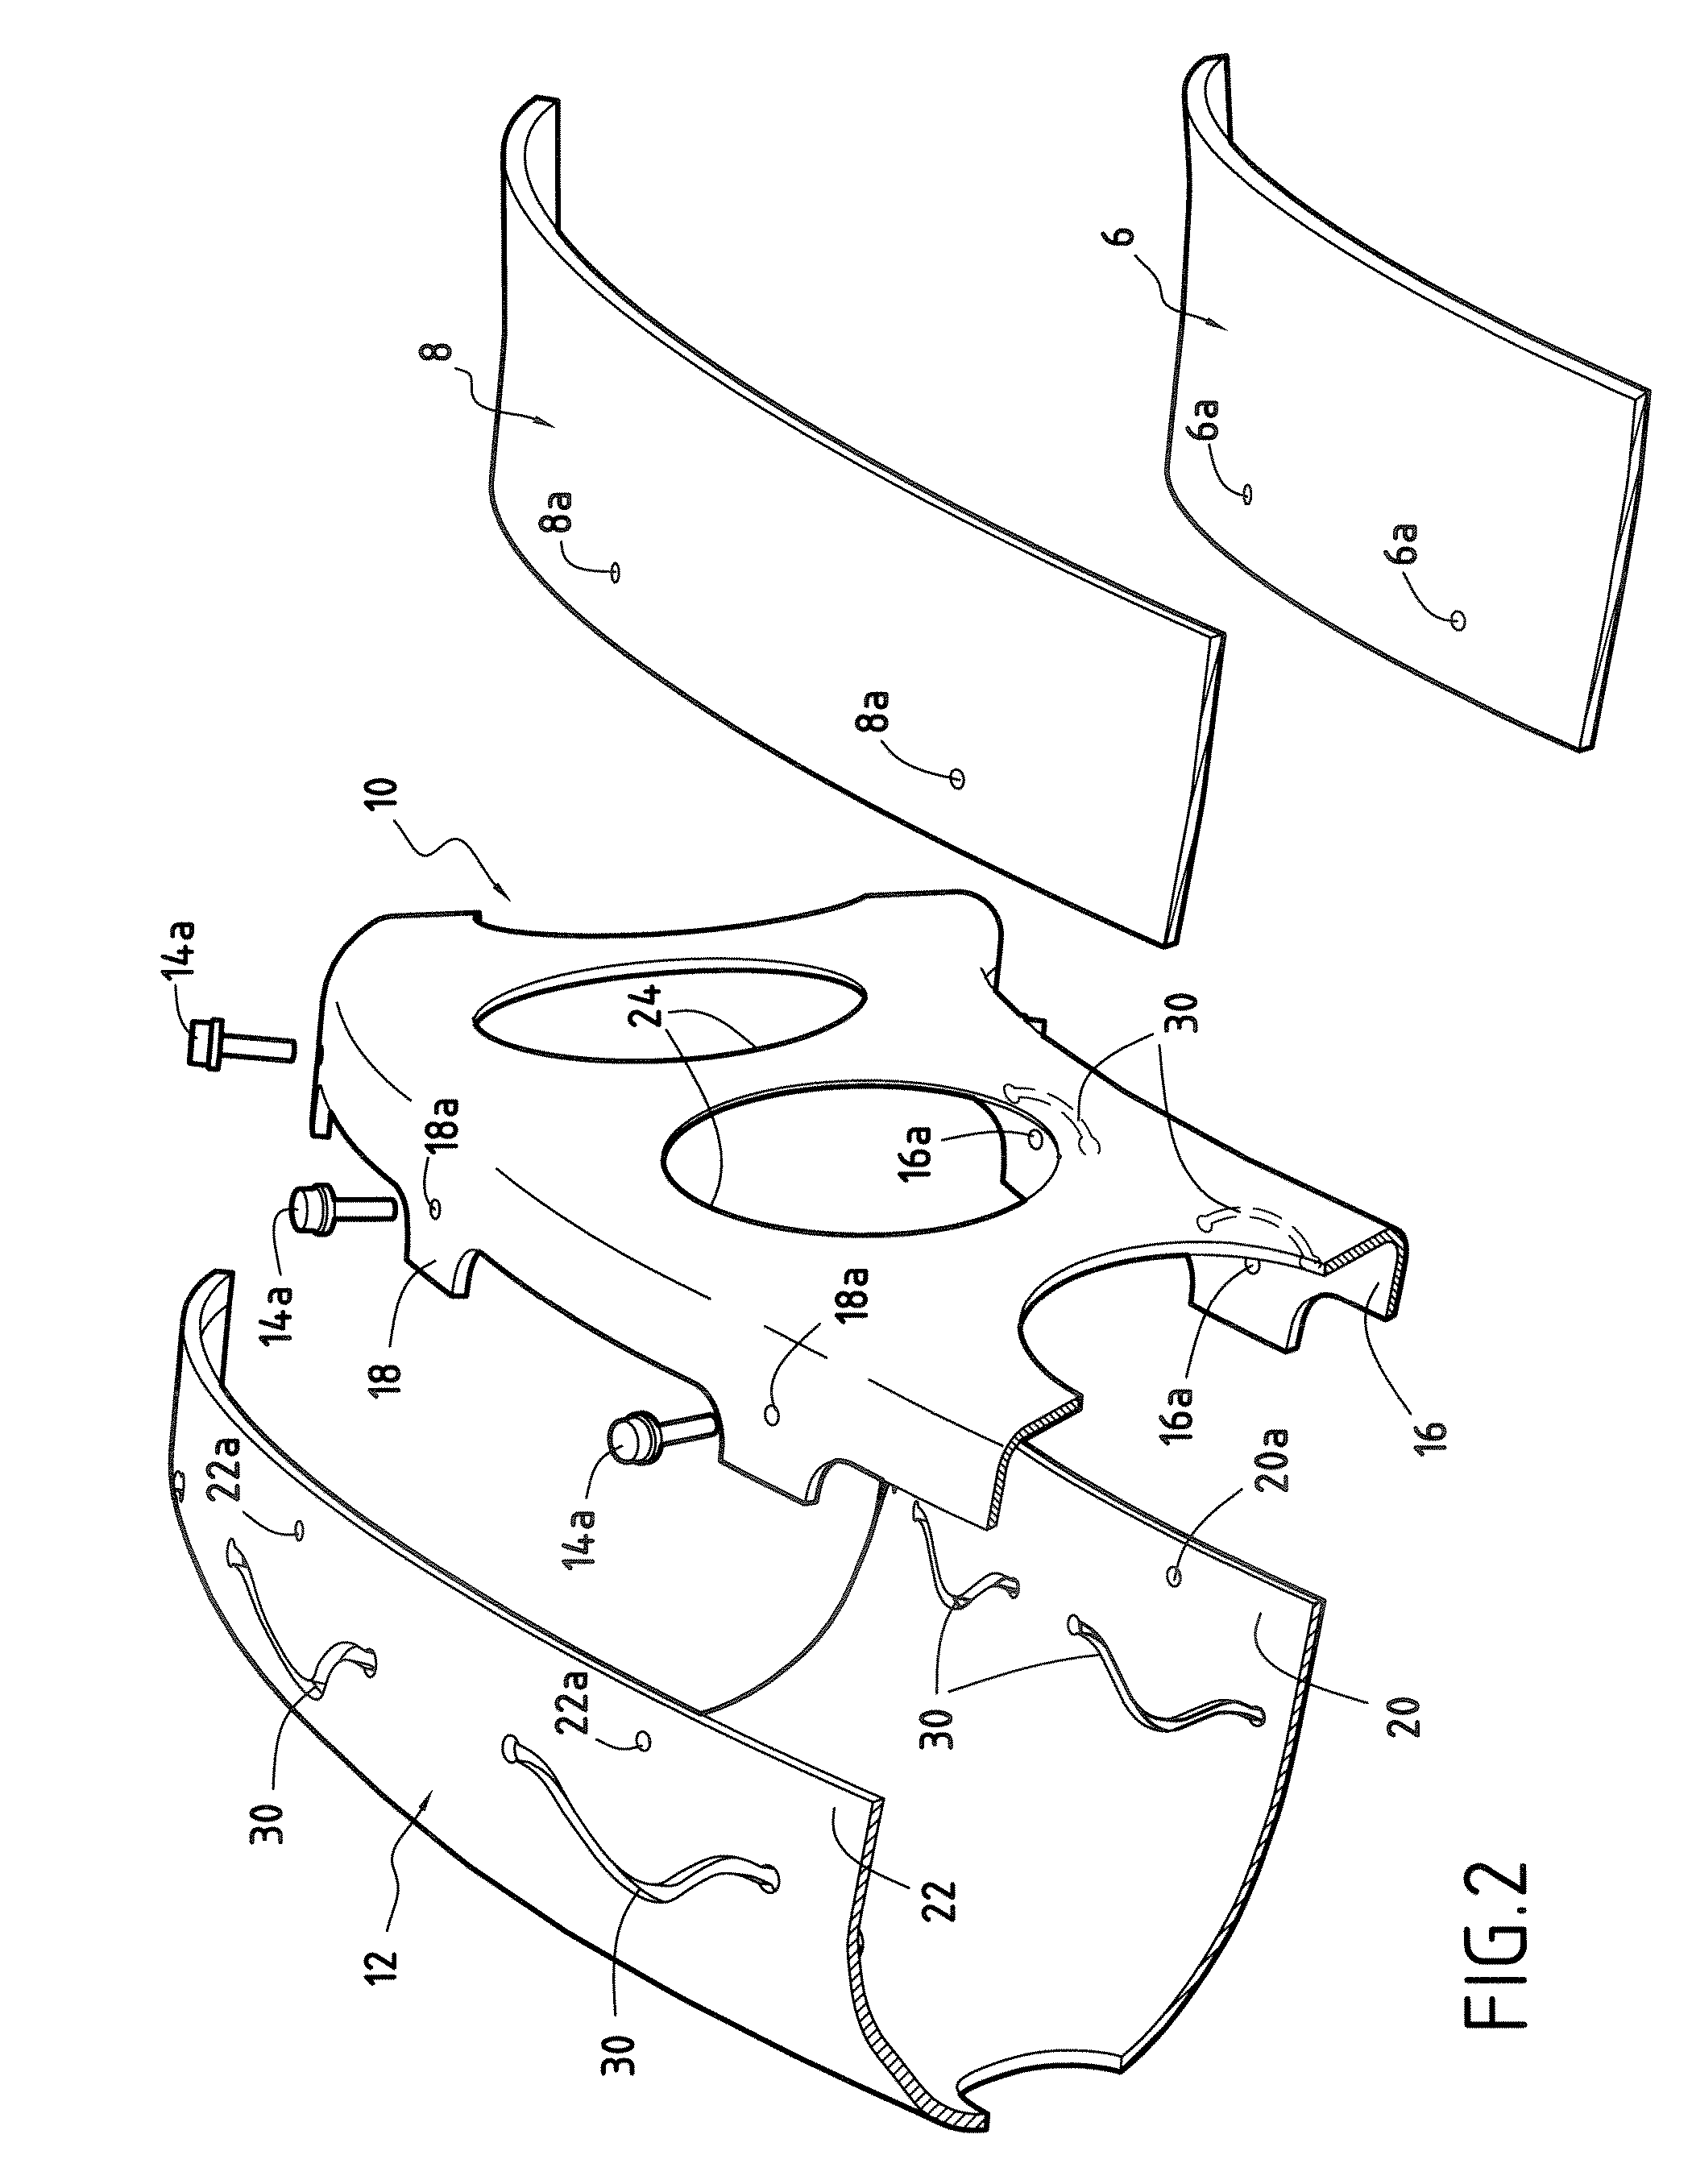 Turbine engine combustion chamber with tangential slots